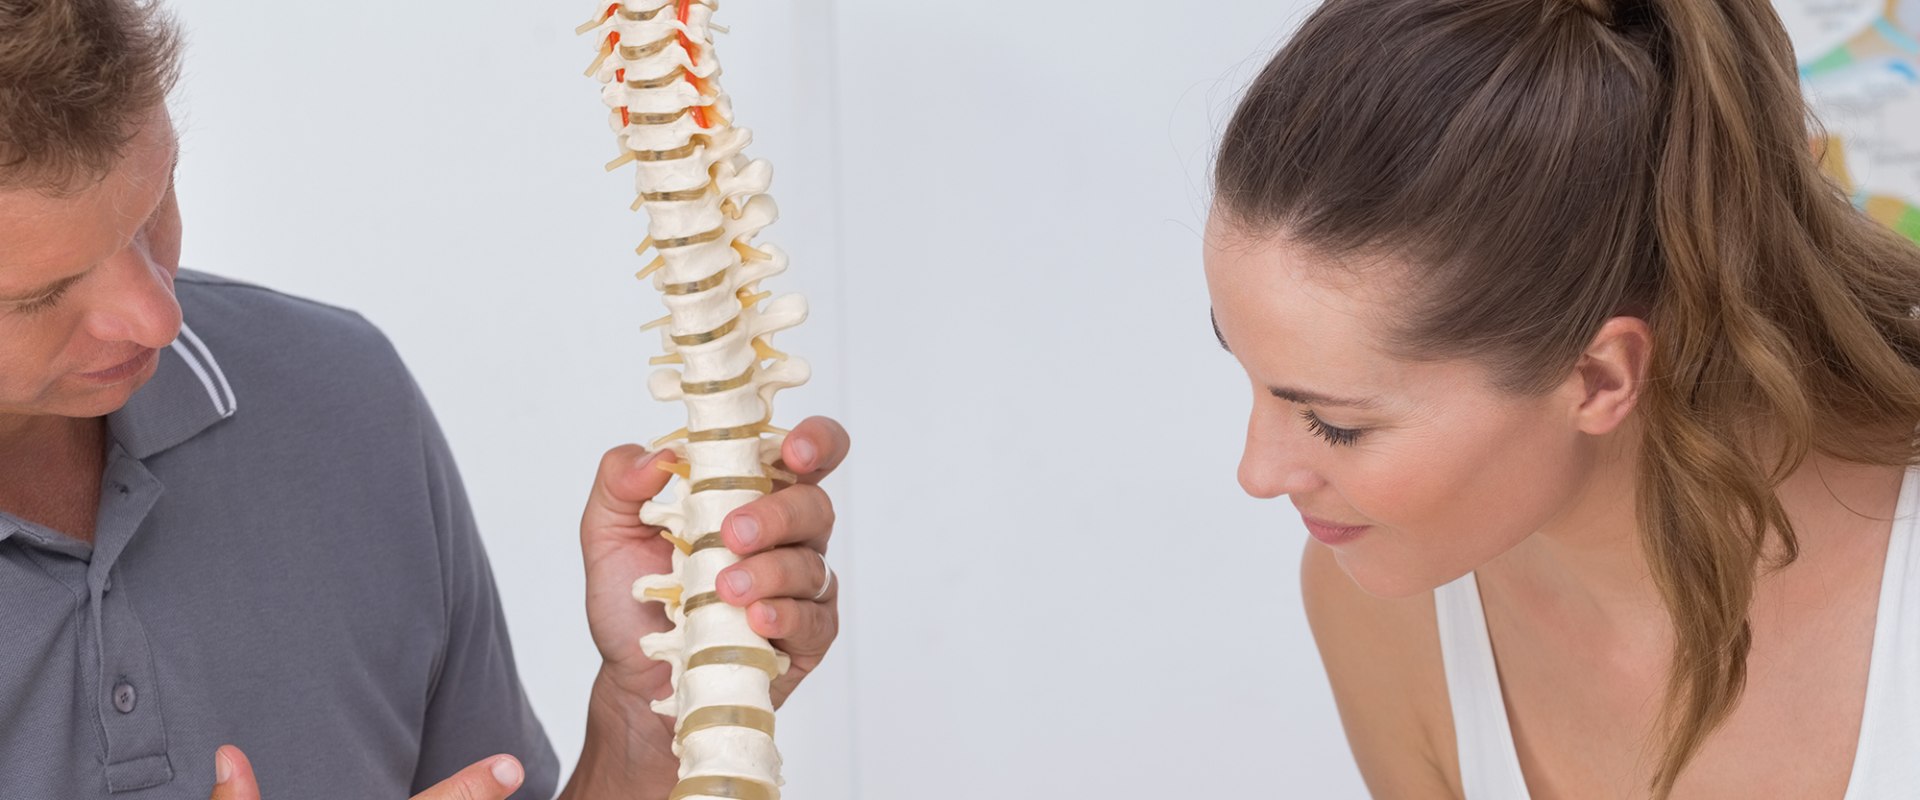 What Types of Treatments Do Australian Chiropractors Offer?